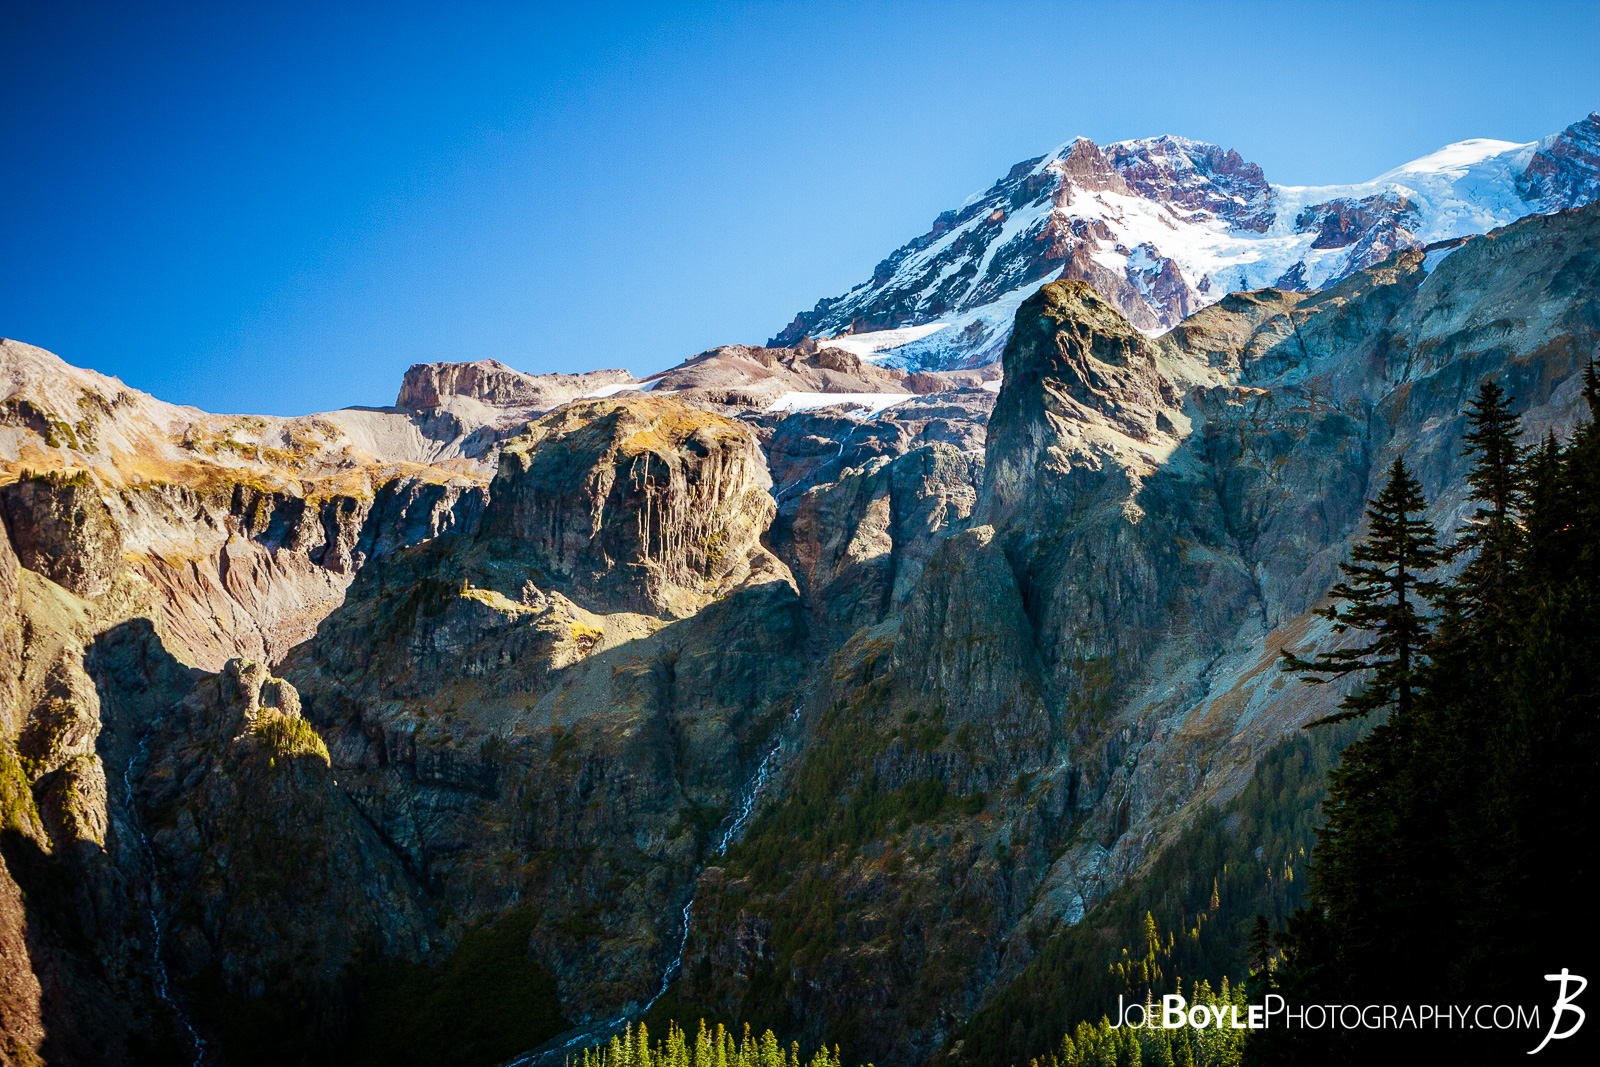  I captured this photo on our descent from the Klapatche campground on to the Golden Lakes Camp Site. What you see here is Tokaloo Spire & Tokaloo Rock in the foreground with Rainier in the background. 